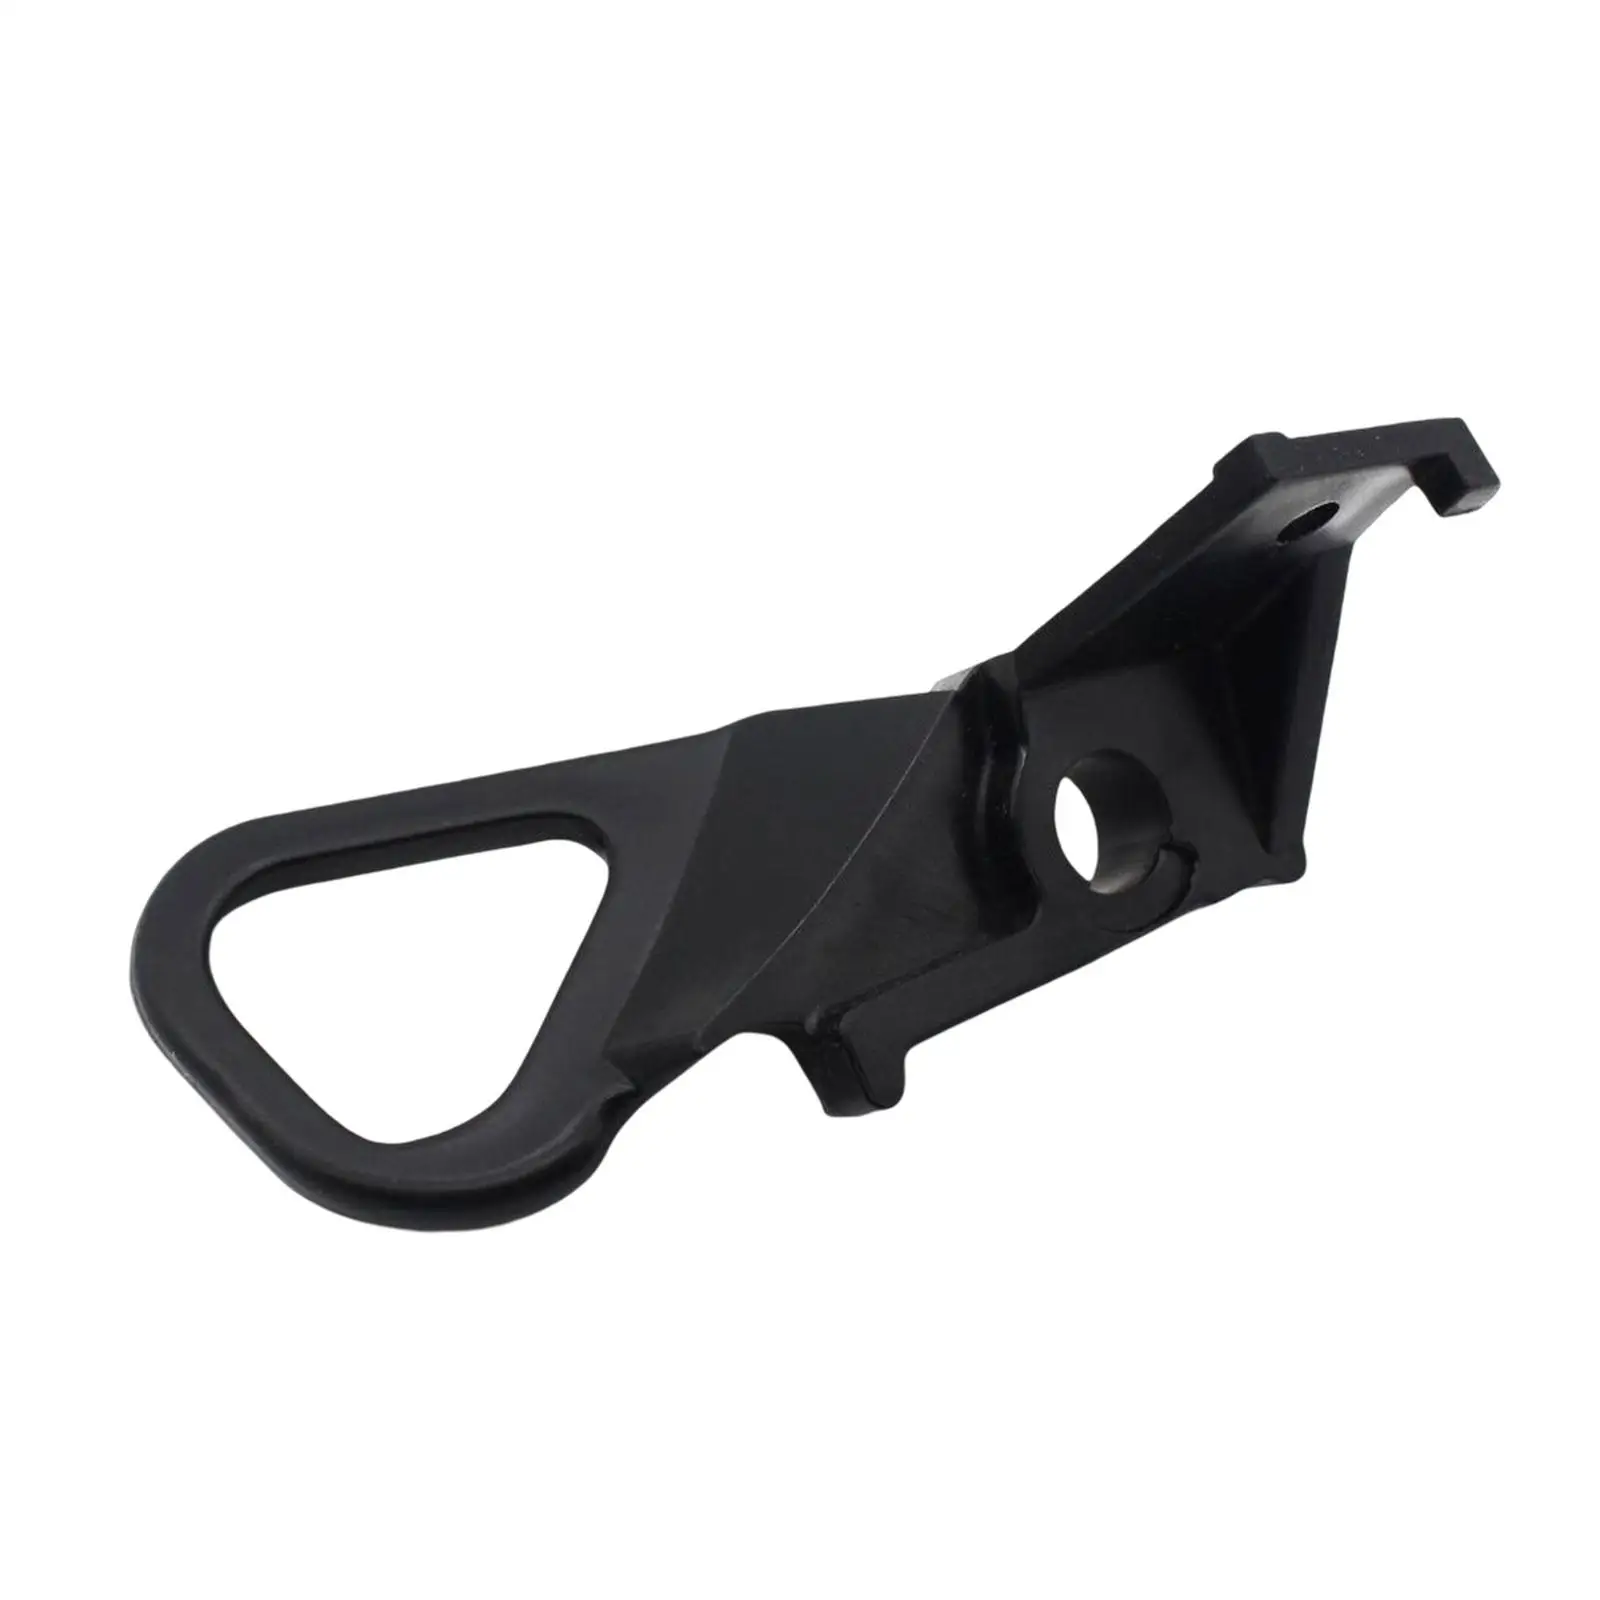 Black Oil Cup Bracket Durable Motorcycle Accessory for Yamaha Yzf R1